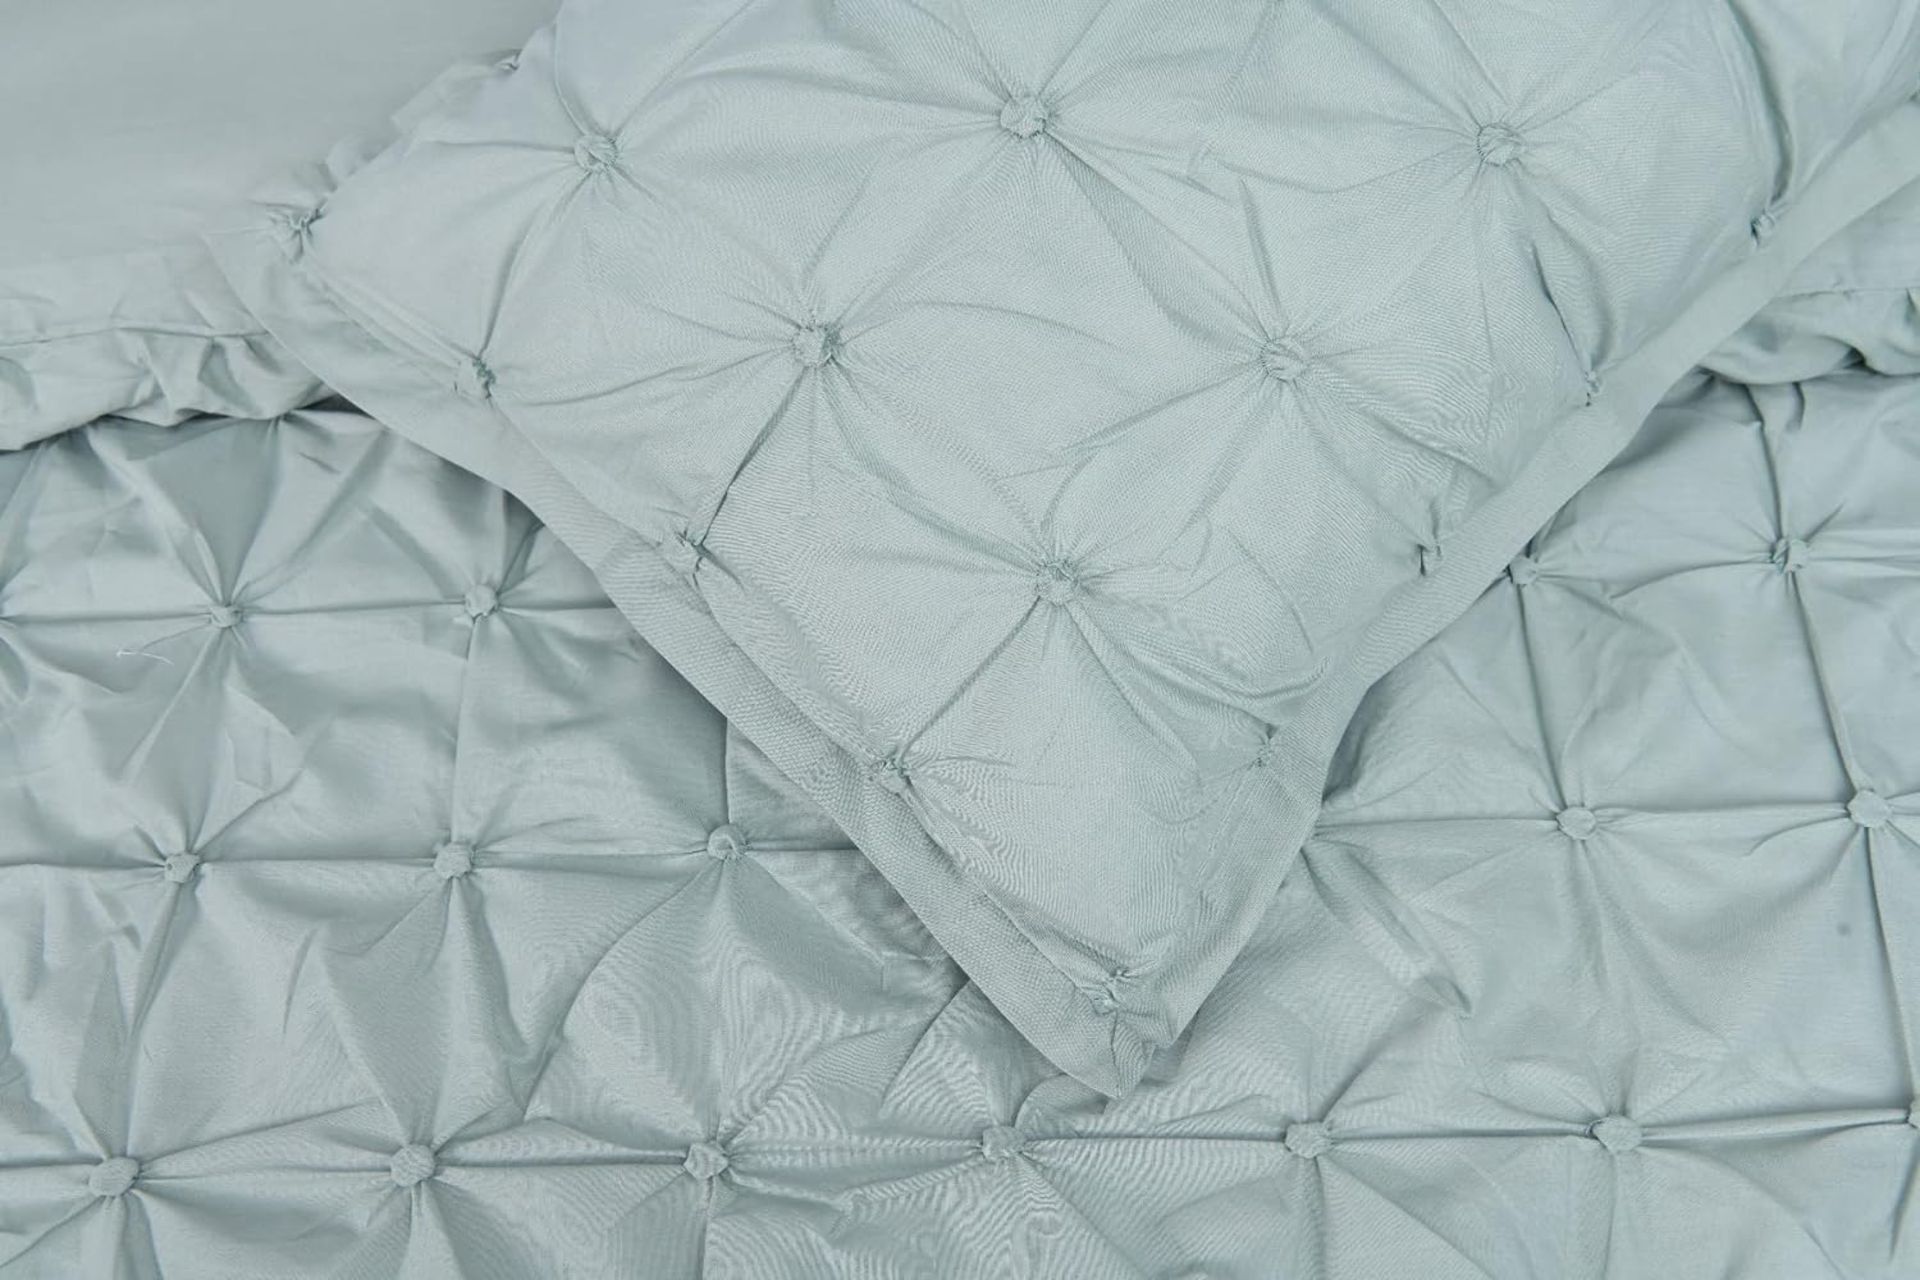 11x NEW & PACKAGED SLEEPDOWN Rouched Easy Care SINGLE Duvet Set - SAGE GREEN. RRP £22.99 EACH. (R7- - Image 6 of 6